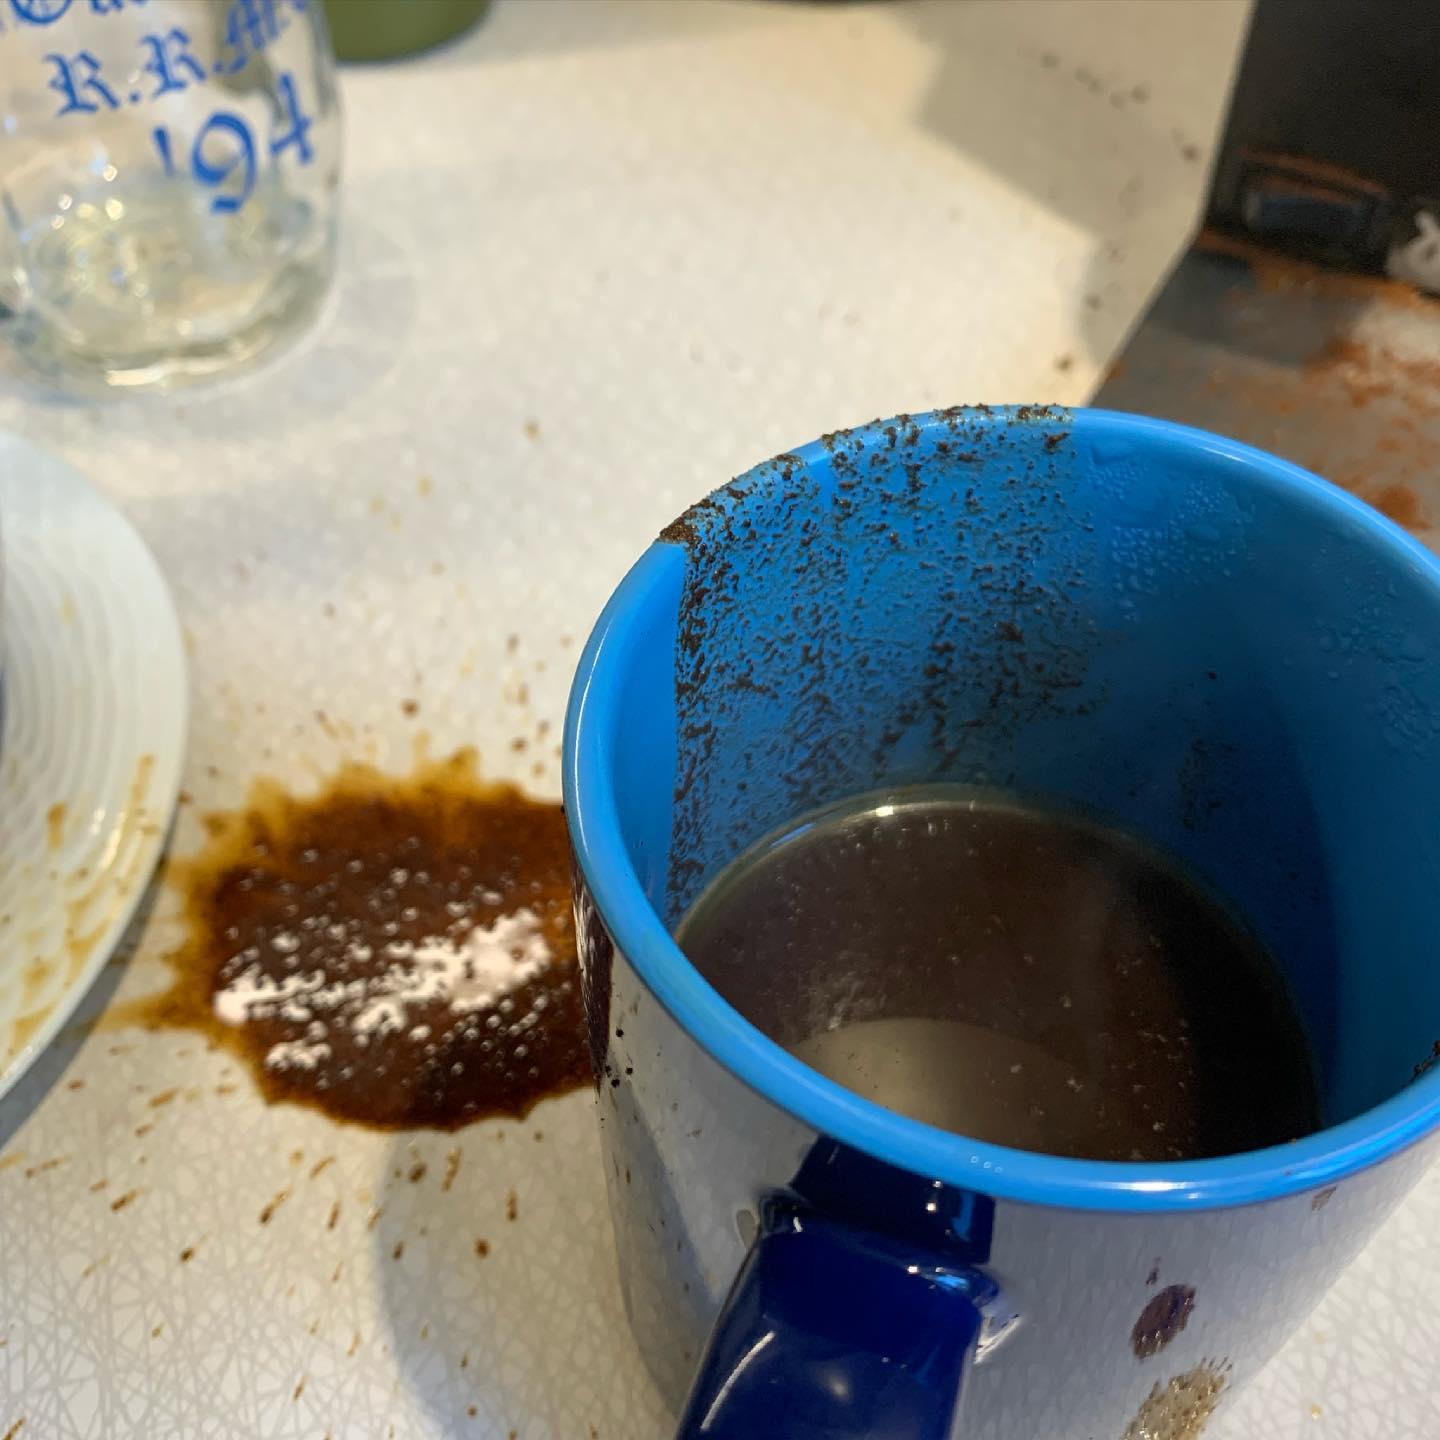 Just trying to enjoy a nice cup of @esquimaltroasting and @elevenspeedcoffee blend and I’m hit with an #aeropressdisaster #yyjcoffee #oops #whatamess #caffein8